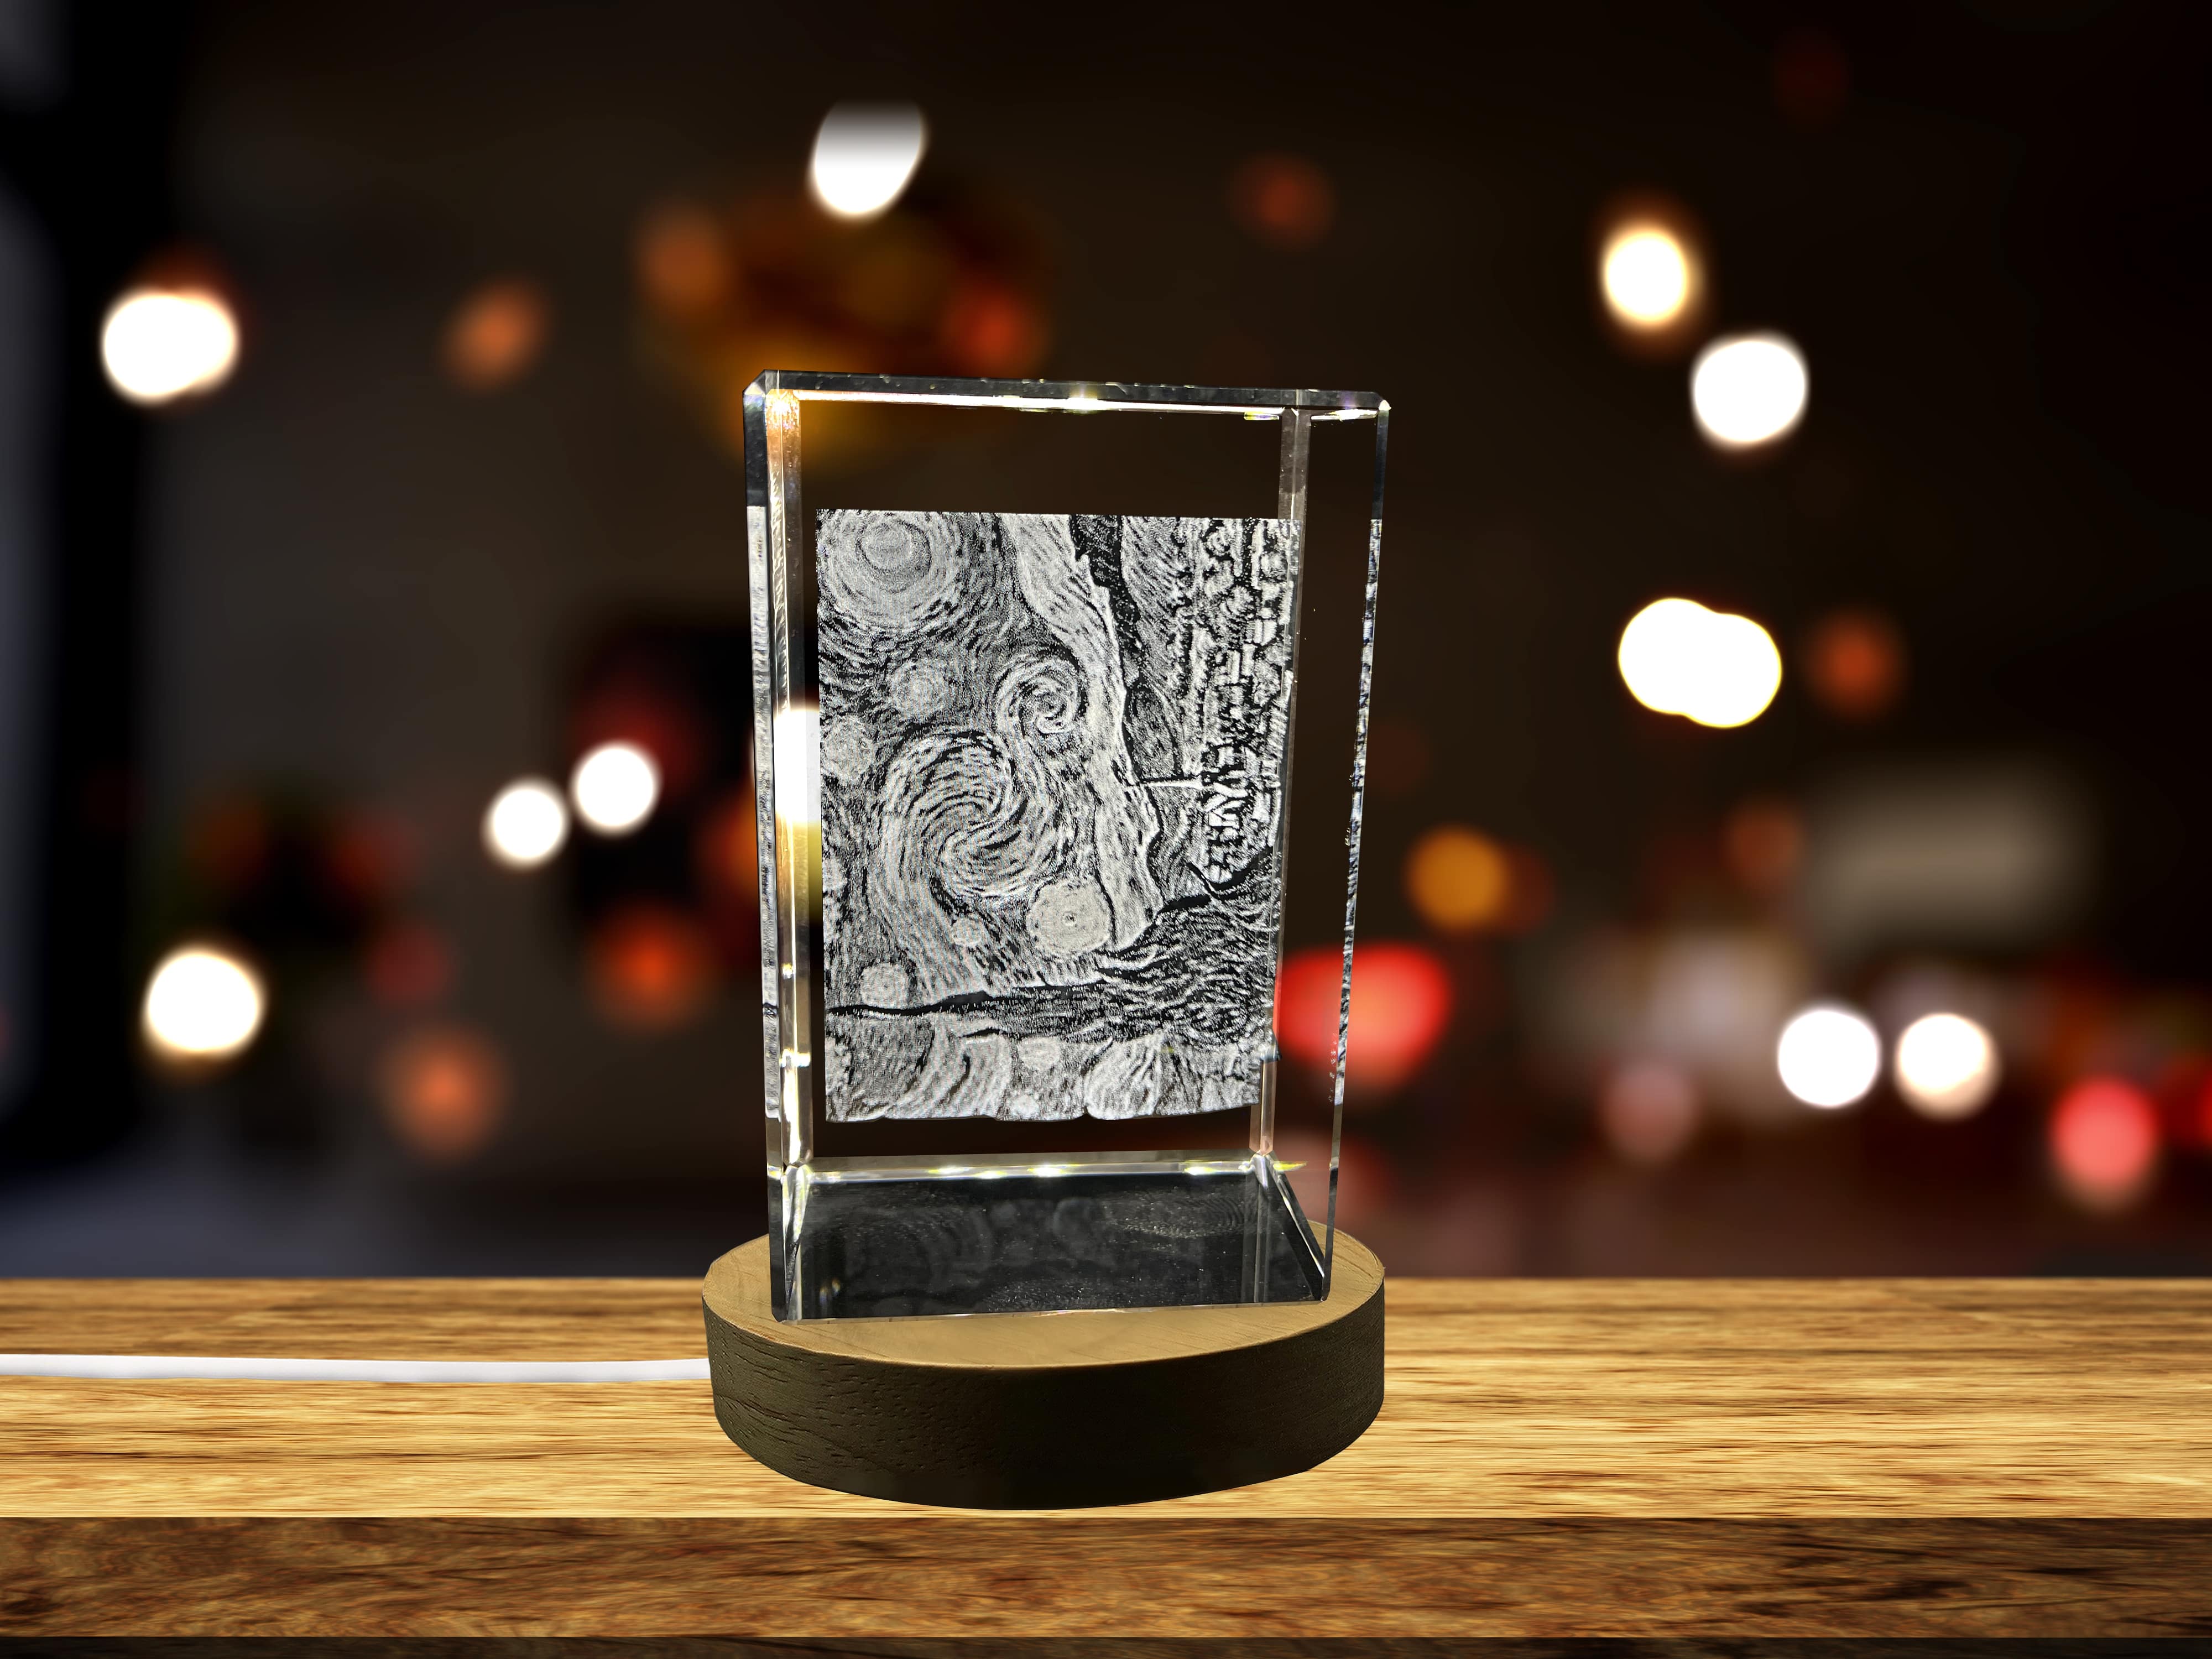 The Starry Night 3D Engraved Crystal Decor A&B Crystal Collection